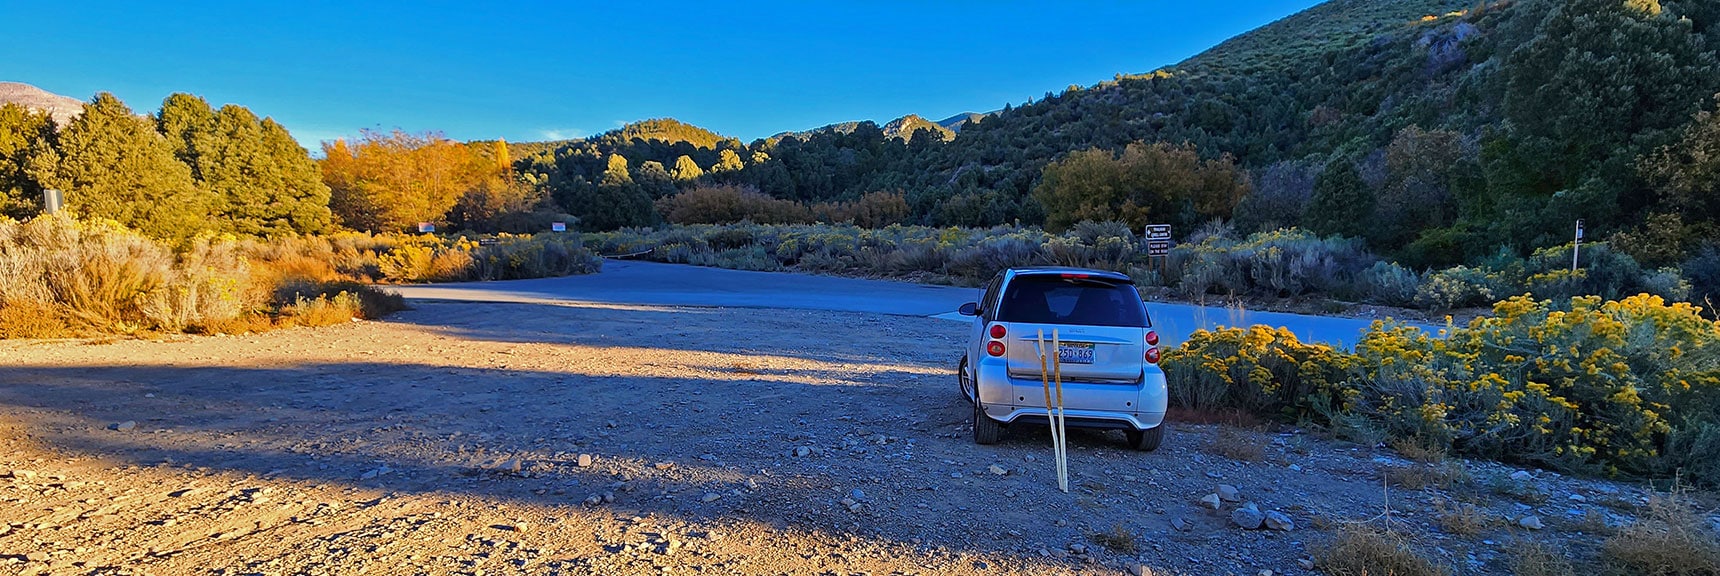 Parking Area at Intersection of Lovell Canyon & Lovell Summit Roads | Griffith Shadow Loop | Lovell Canyon, Nevada